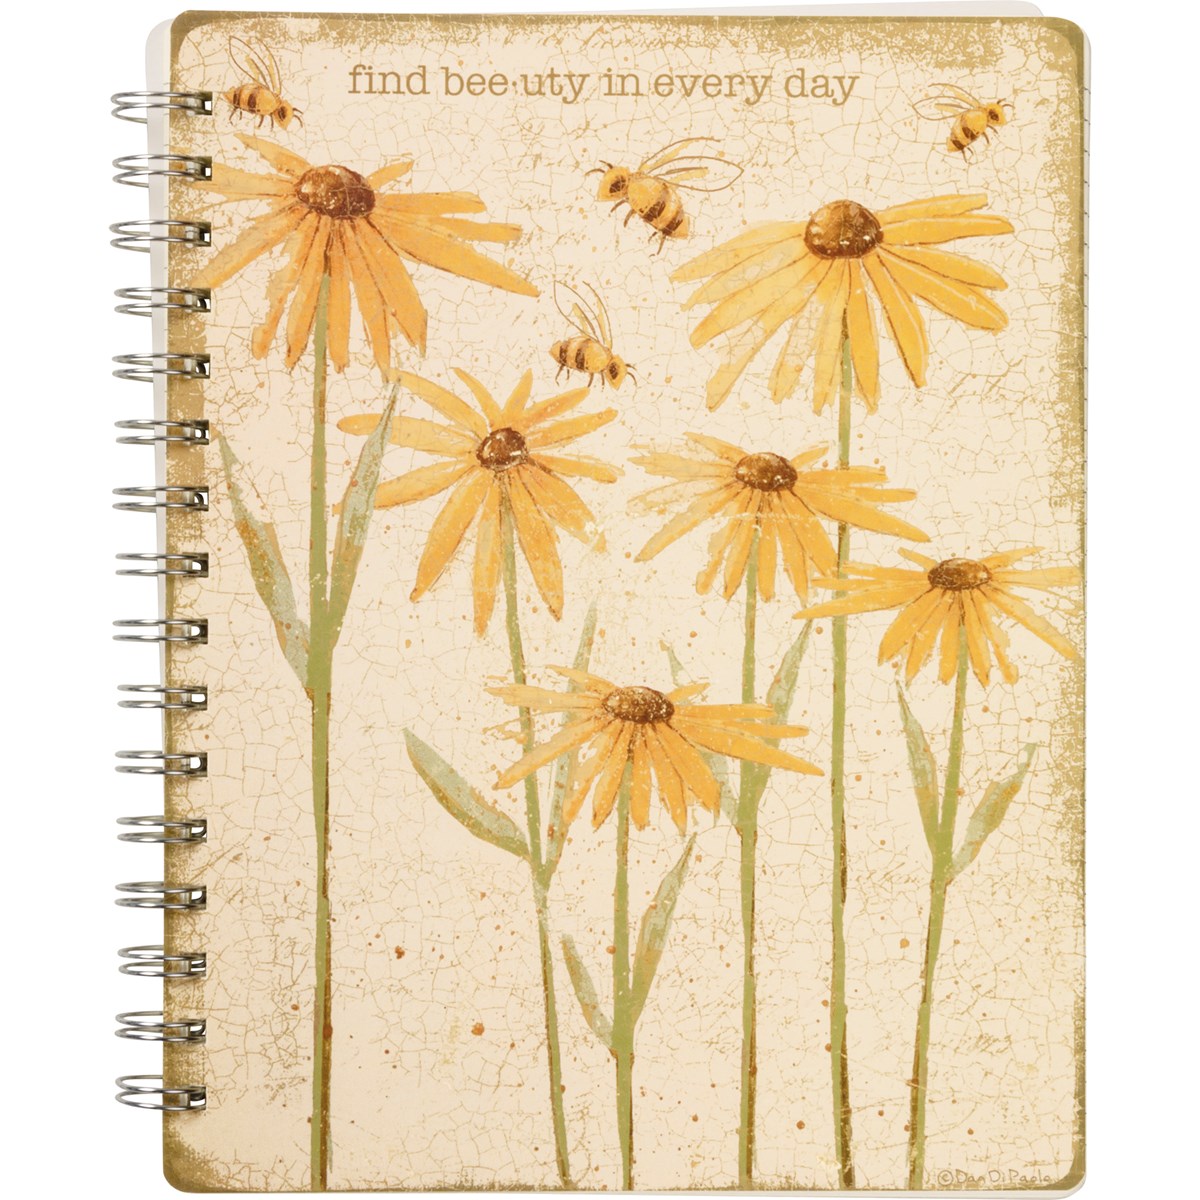 Spiral Notebook - "Find Bee-uty in Every Day"